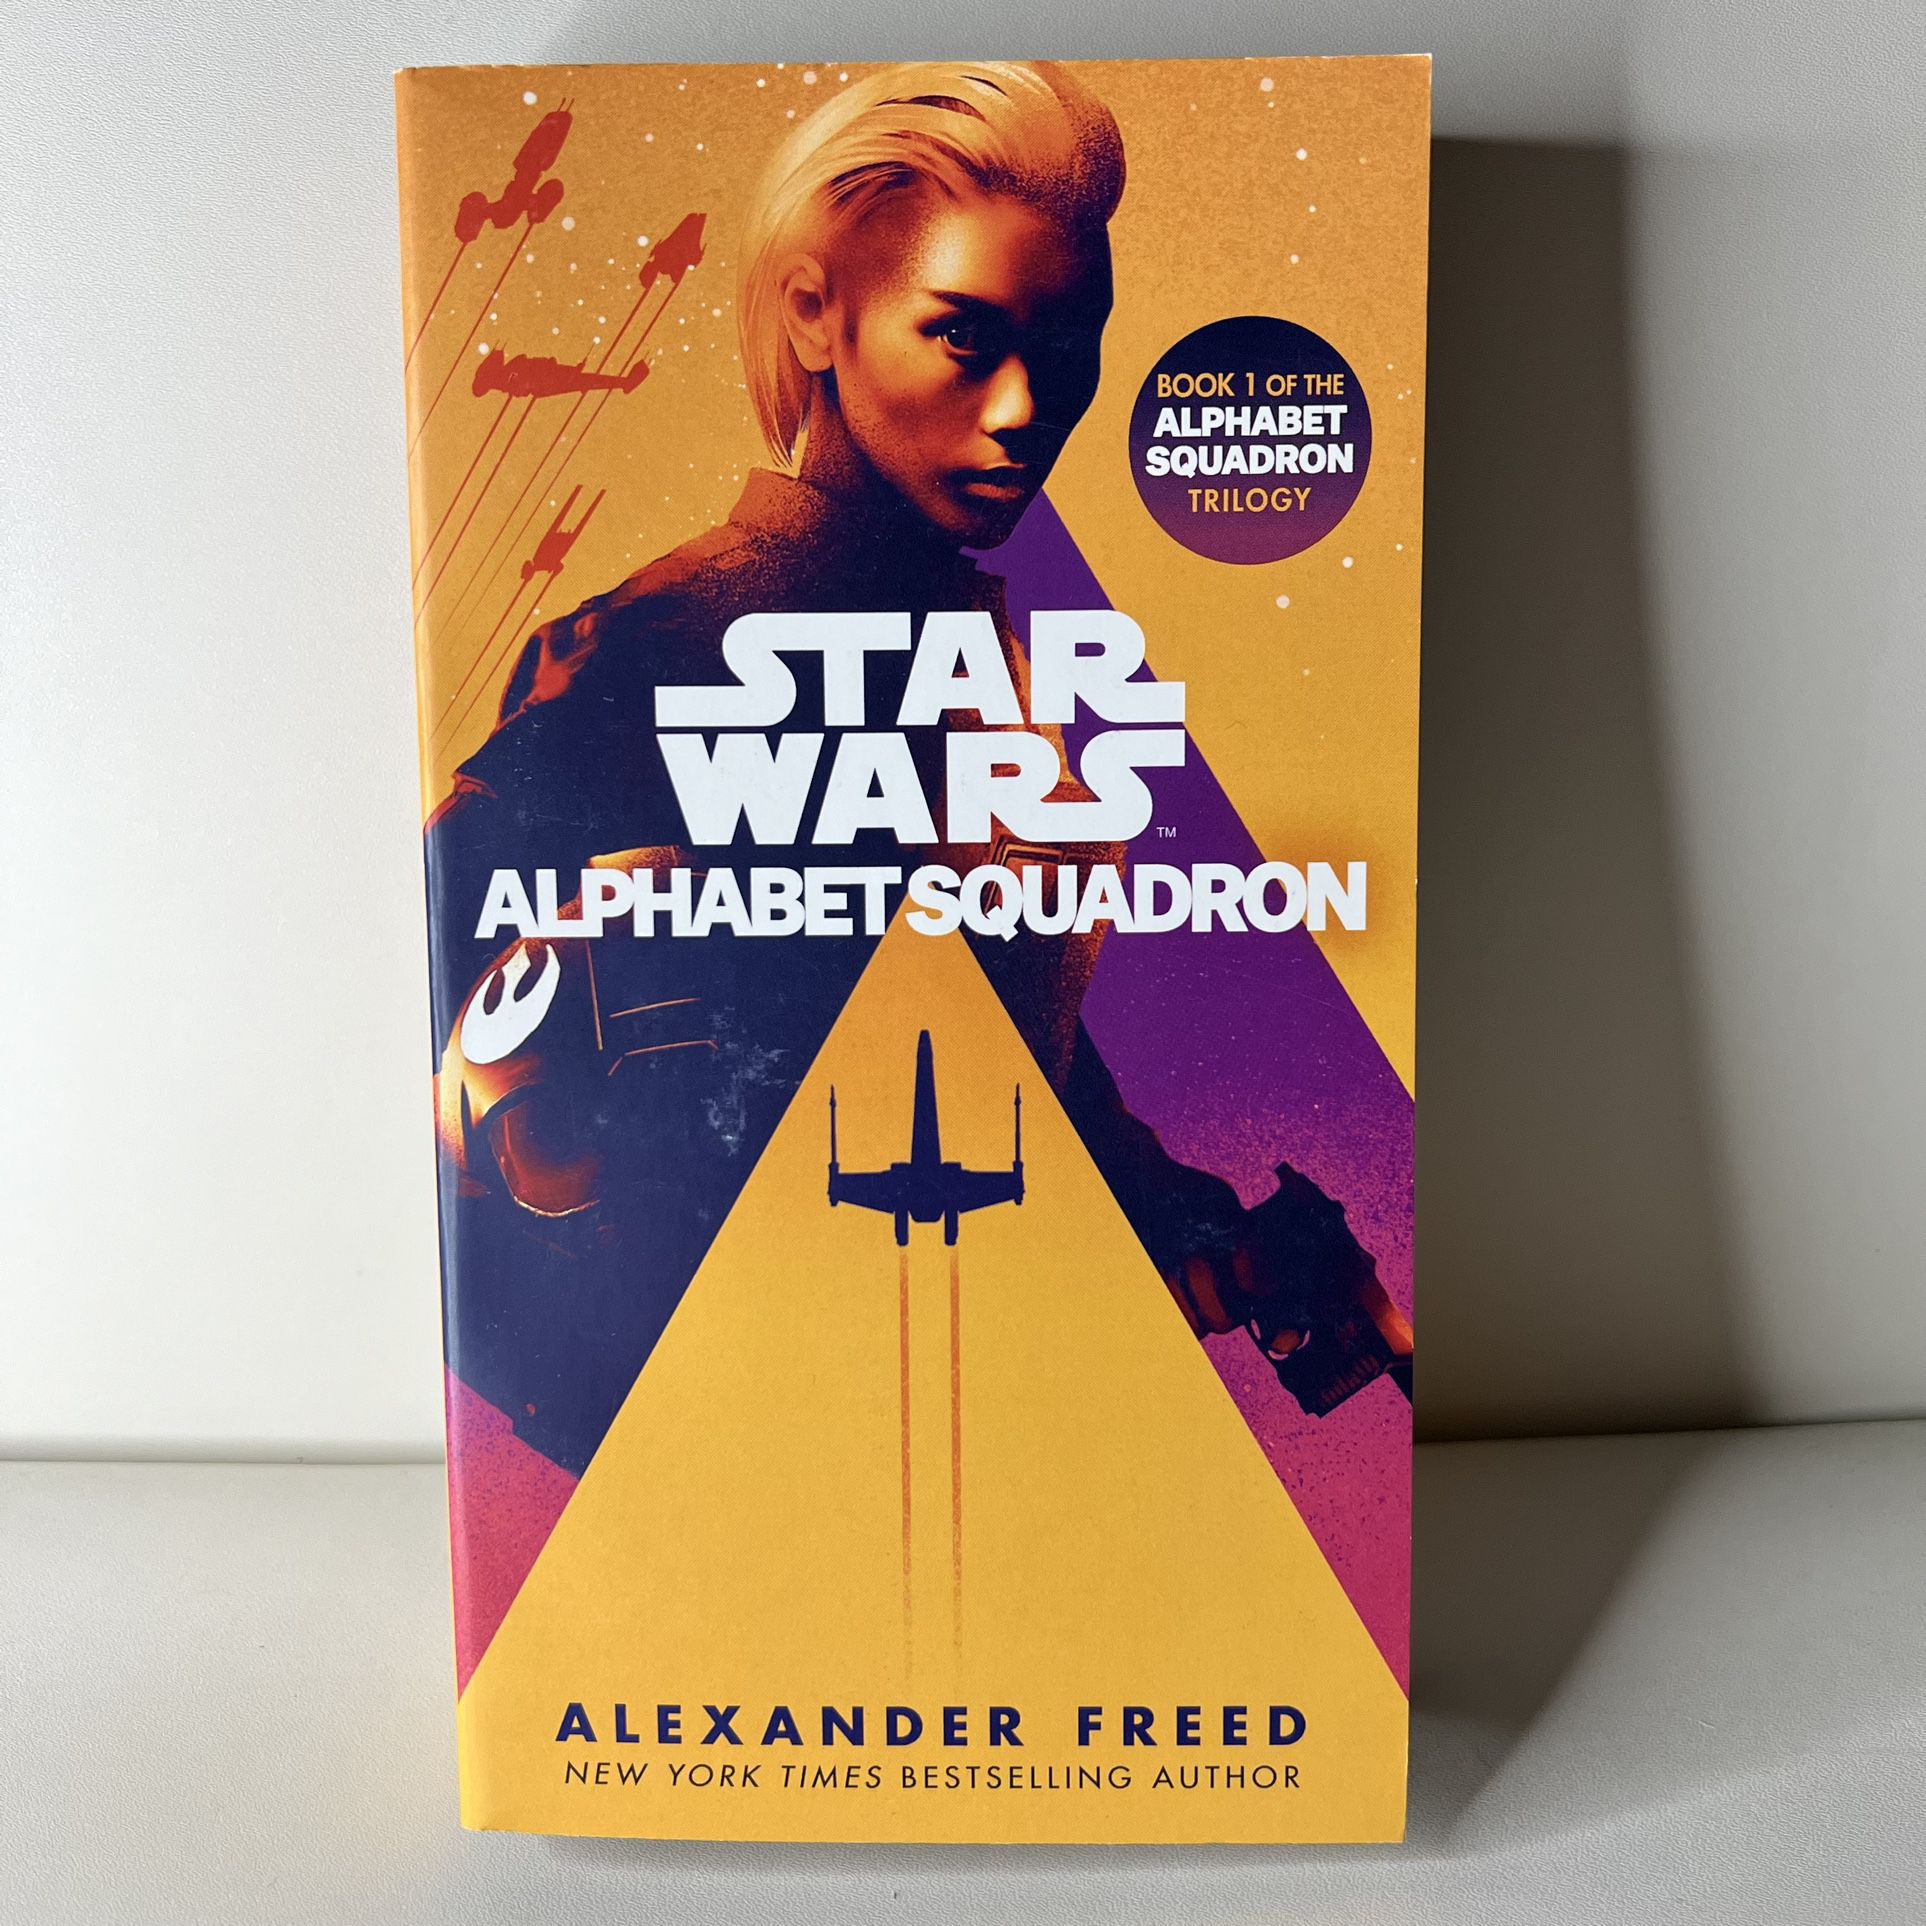 Star Wars - Alphabet Squadron 2019 by Alexander Freed